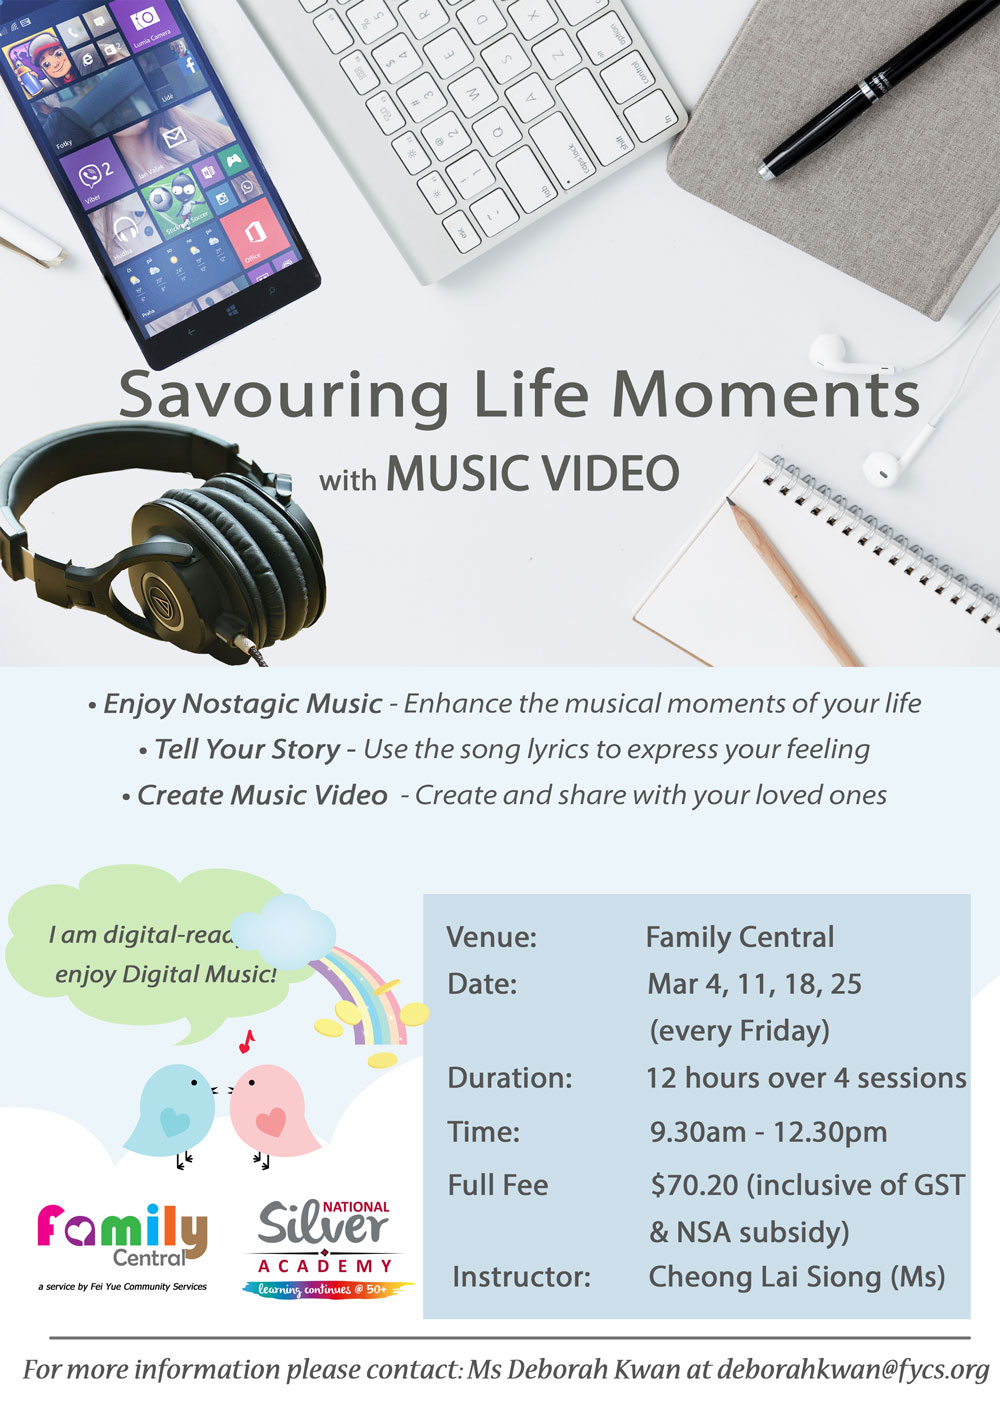 Savouring Life Moments with Music Video